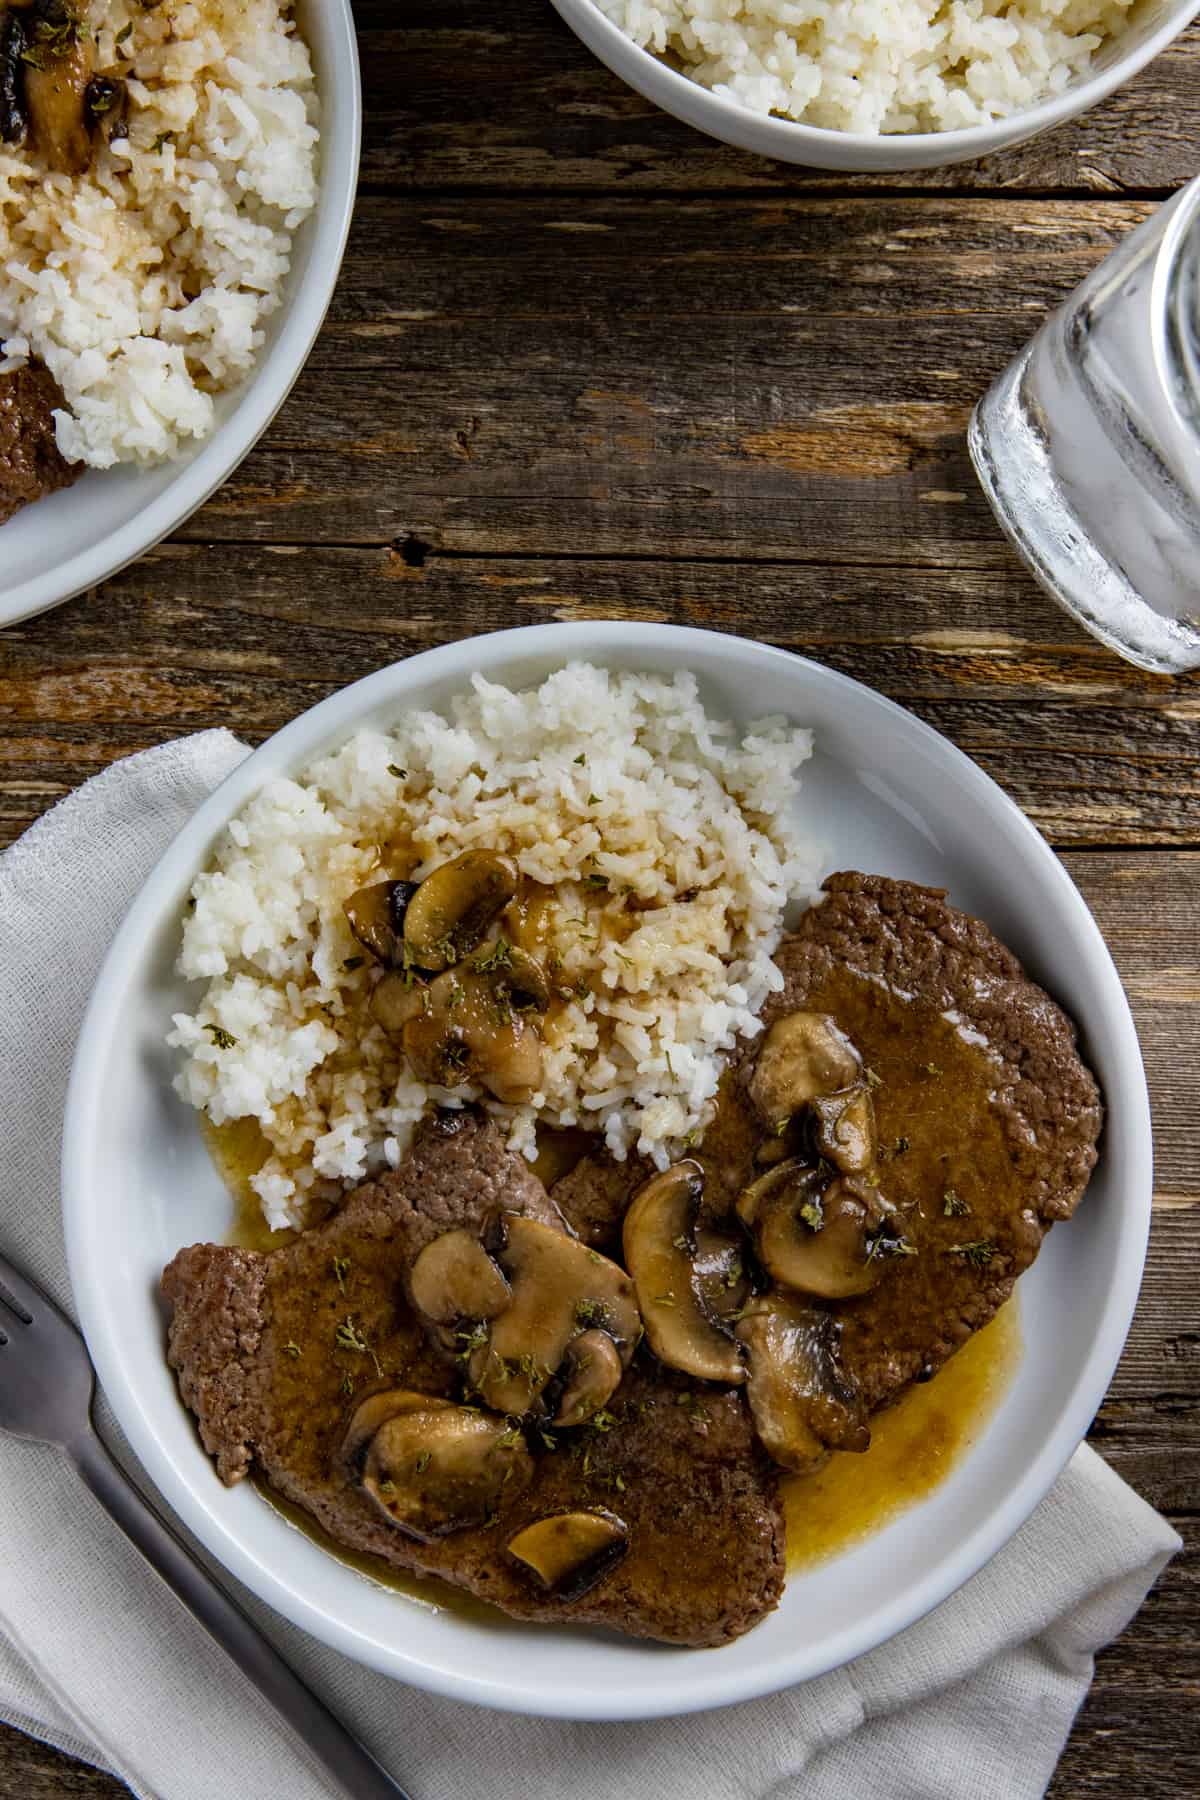 Two cooked steaks covered with gravy and mushrooms with a side of rice and gravy.